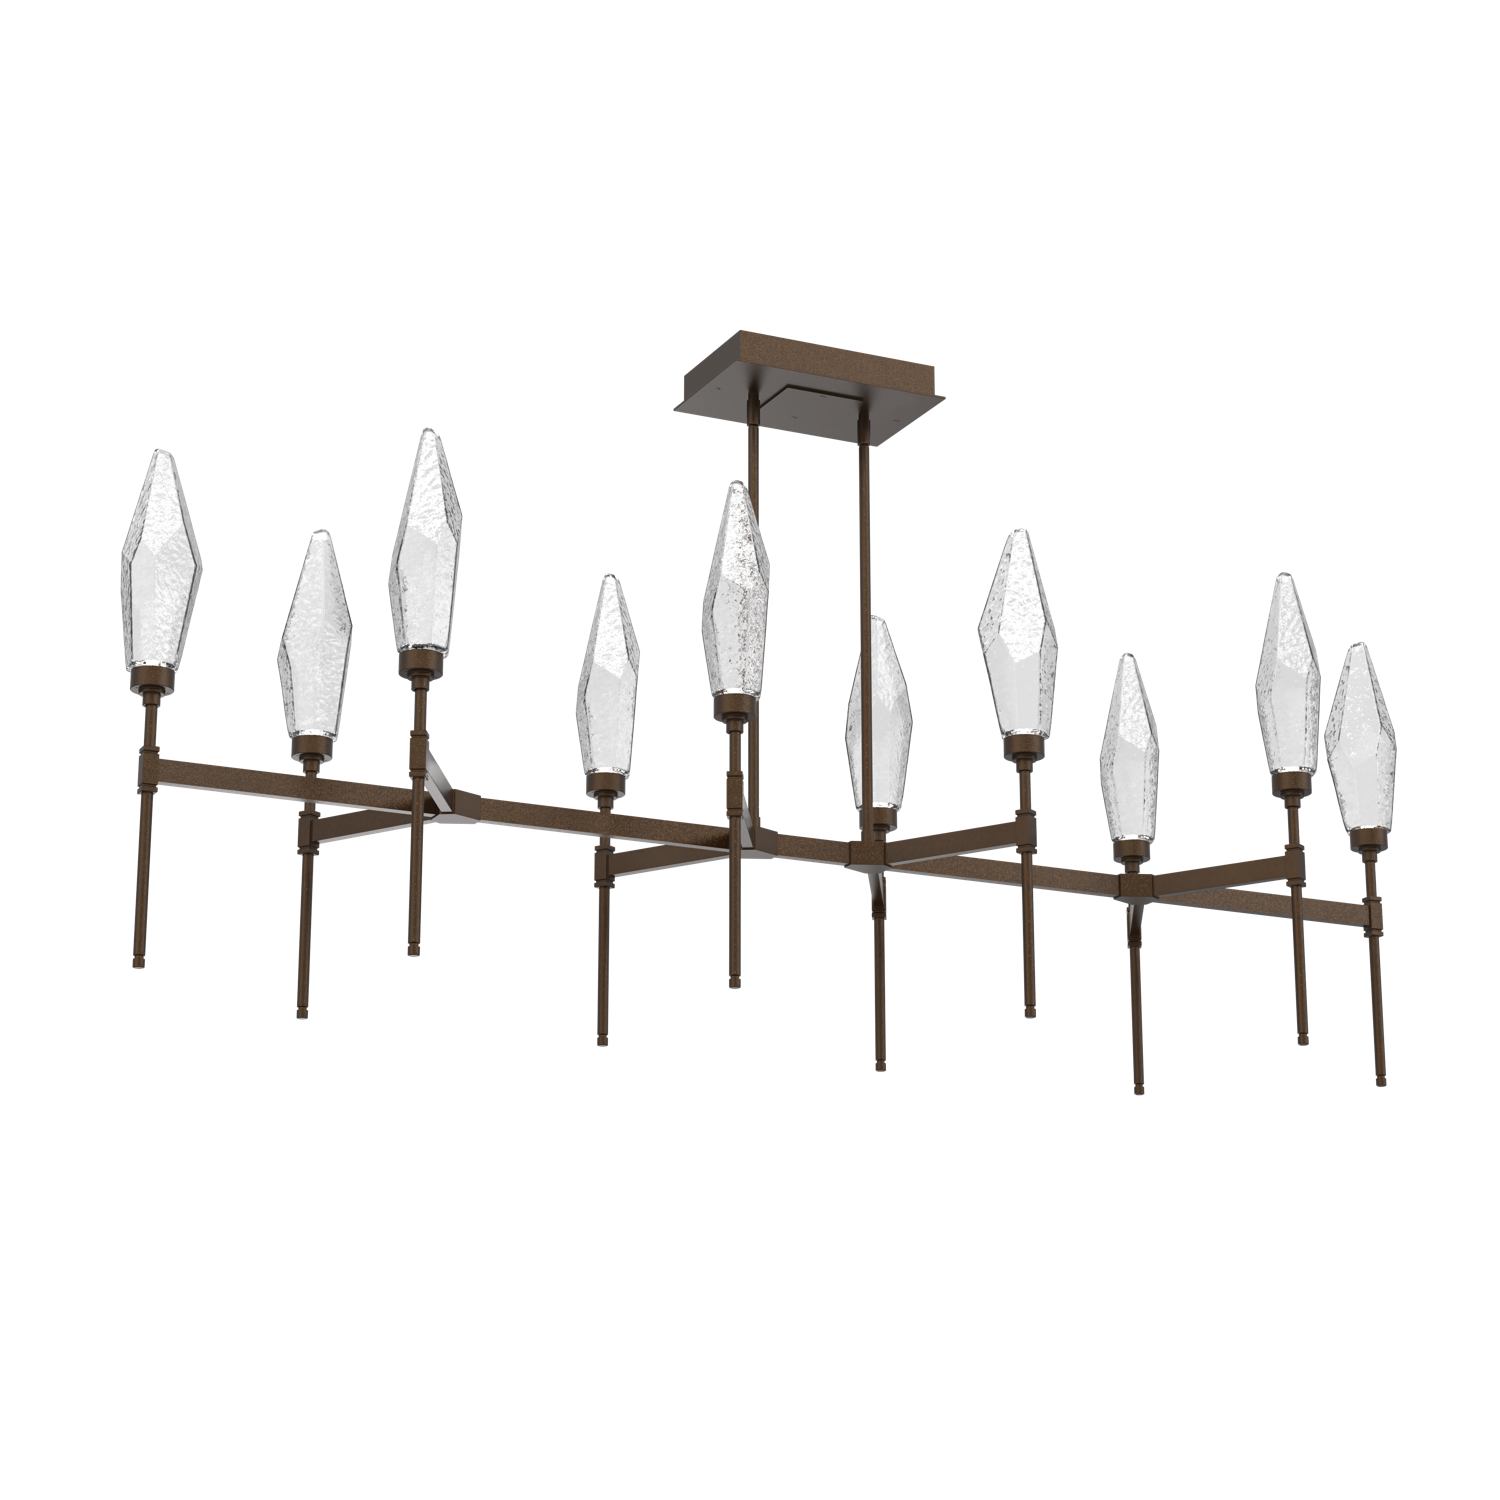 PLB0050-67-FB-CC-Hammerton-Studio-Rock-Crystal-67-inch-linear-belvedere-chandelier-with-flat-bronze-finish-and-clear-glass-shades-and-LED-lamping